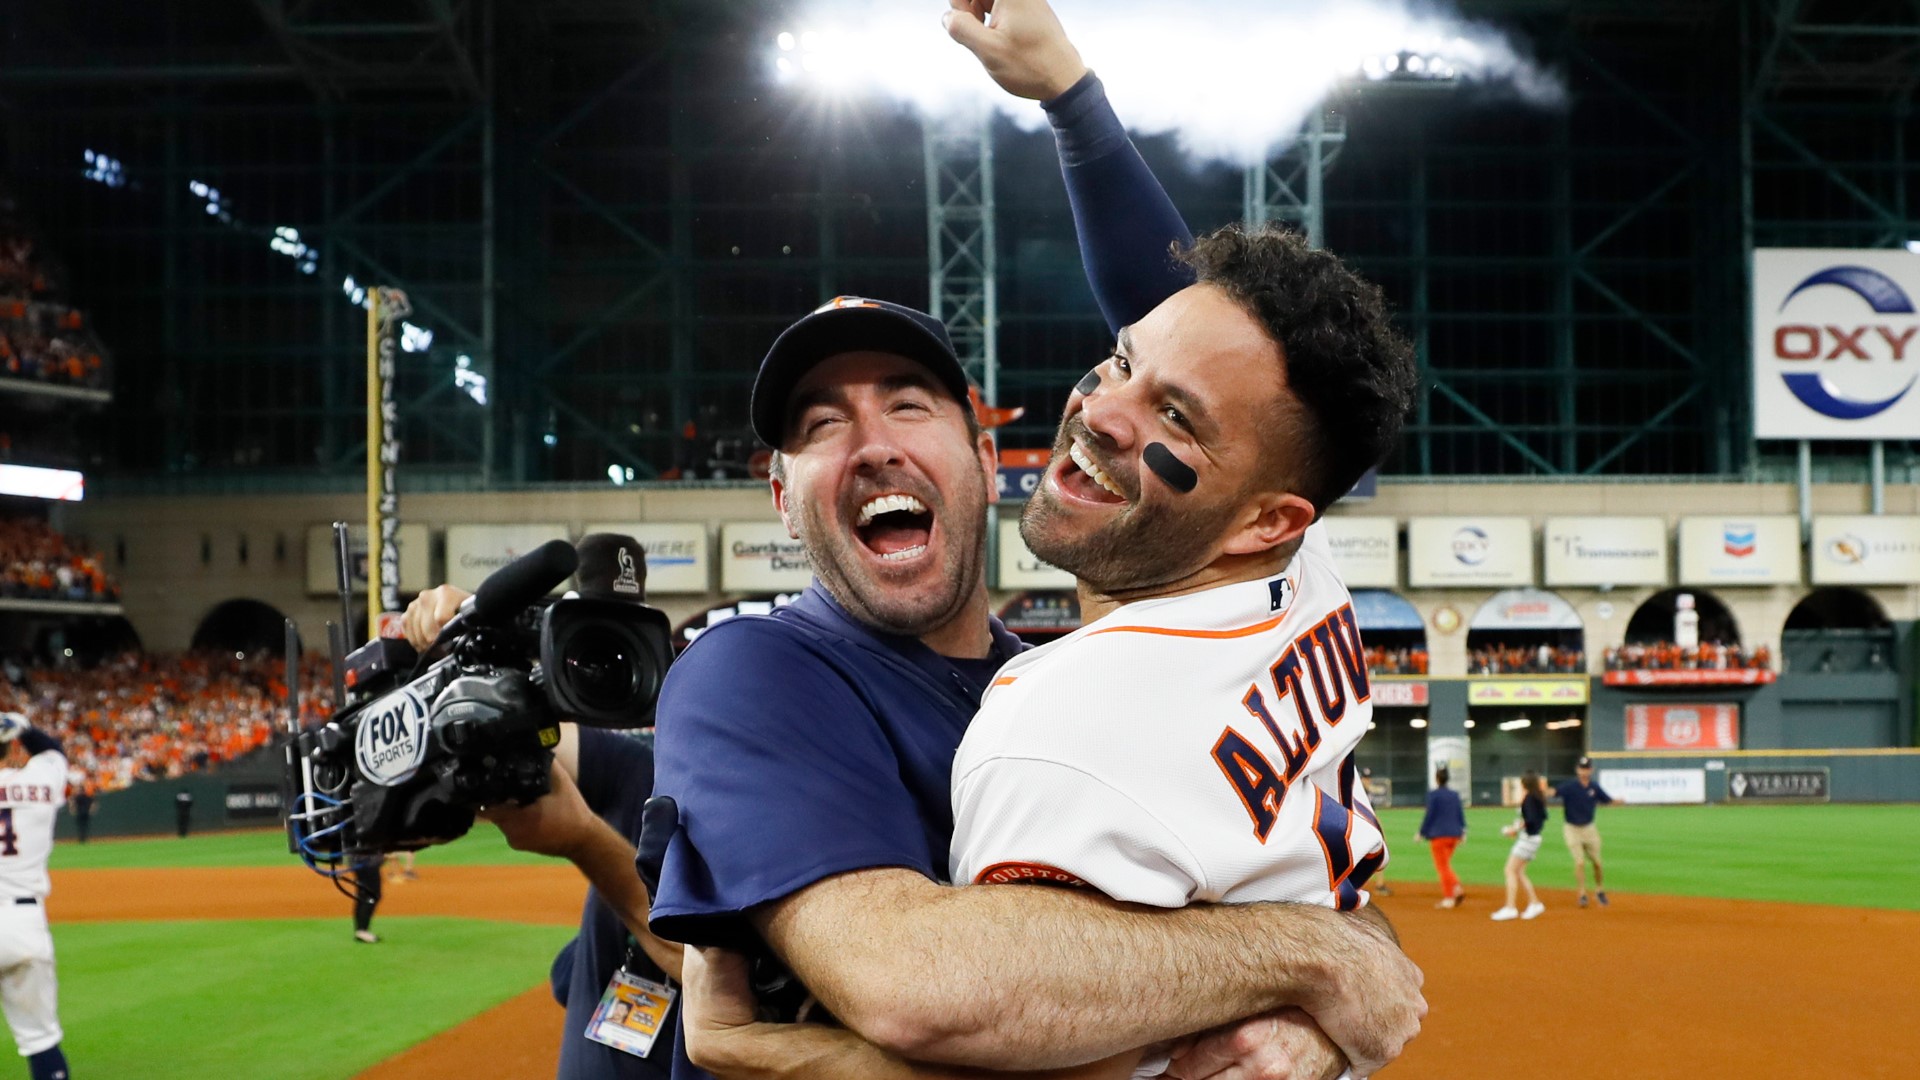 Look out Washington Nationals, the Houston Astros are ready to #TakeItBack!